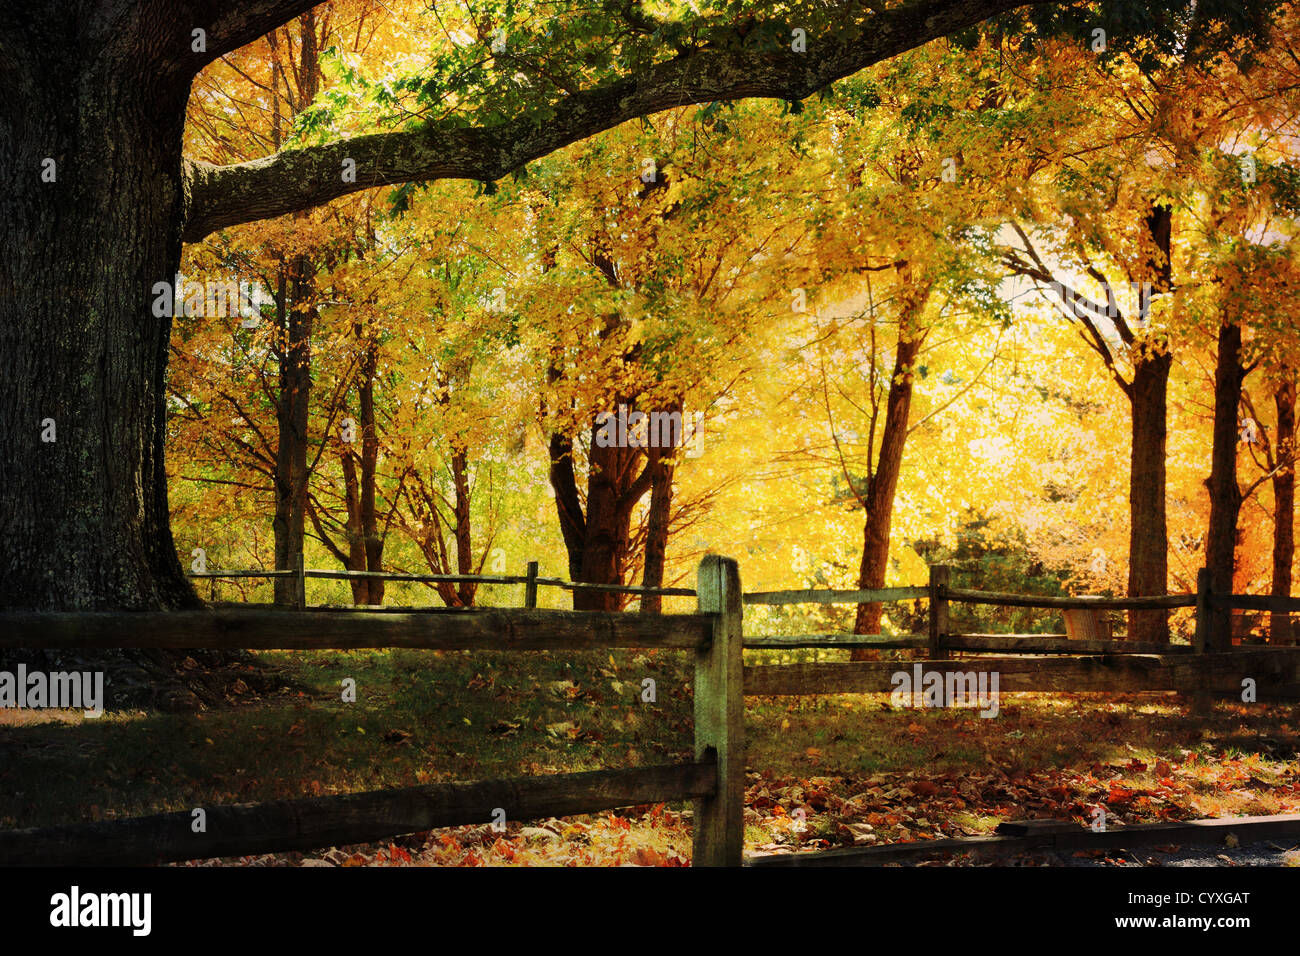 Photo based illustration of a large oak tree surrounded by beautiful autumn colors. Stock Photo